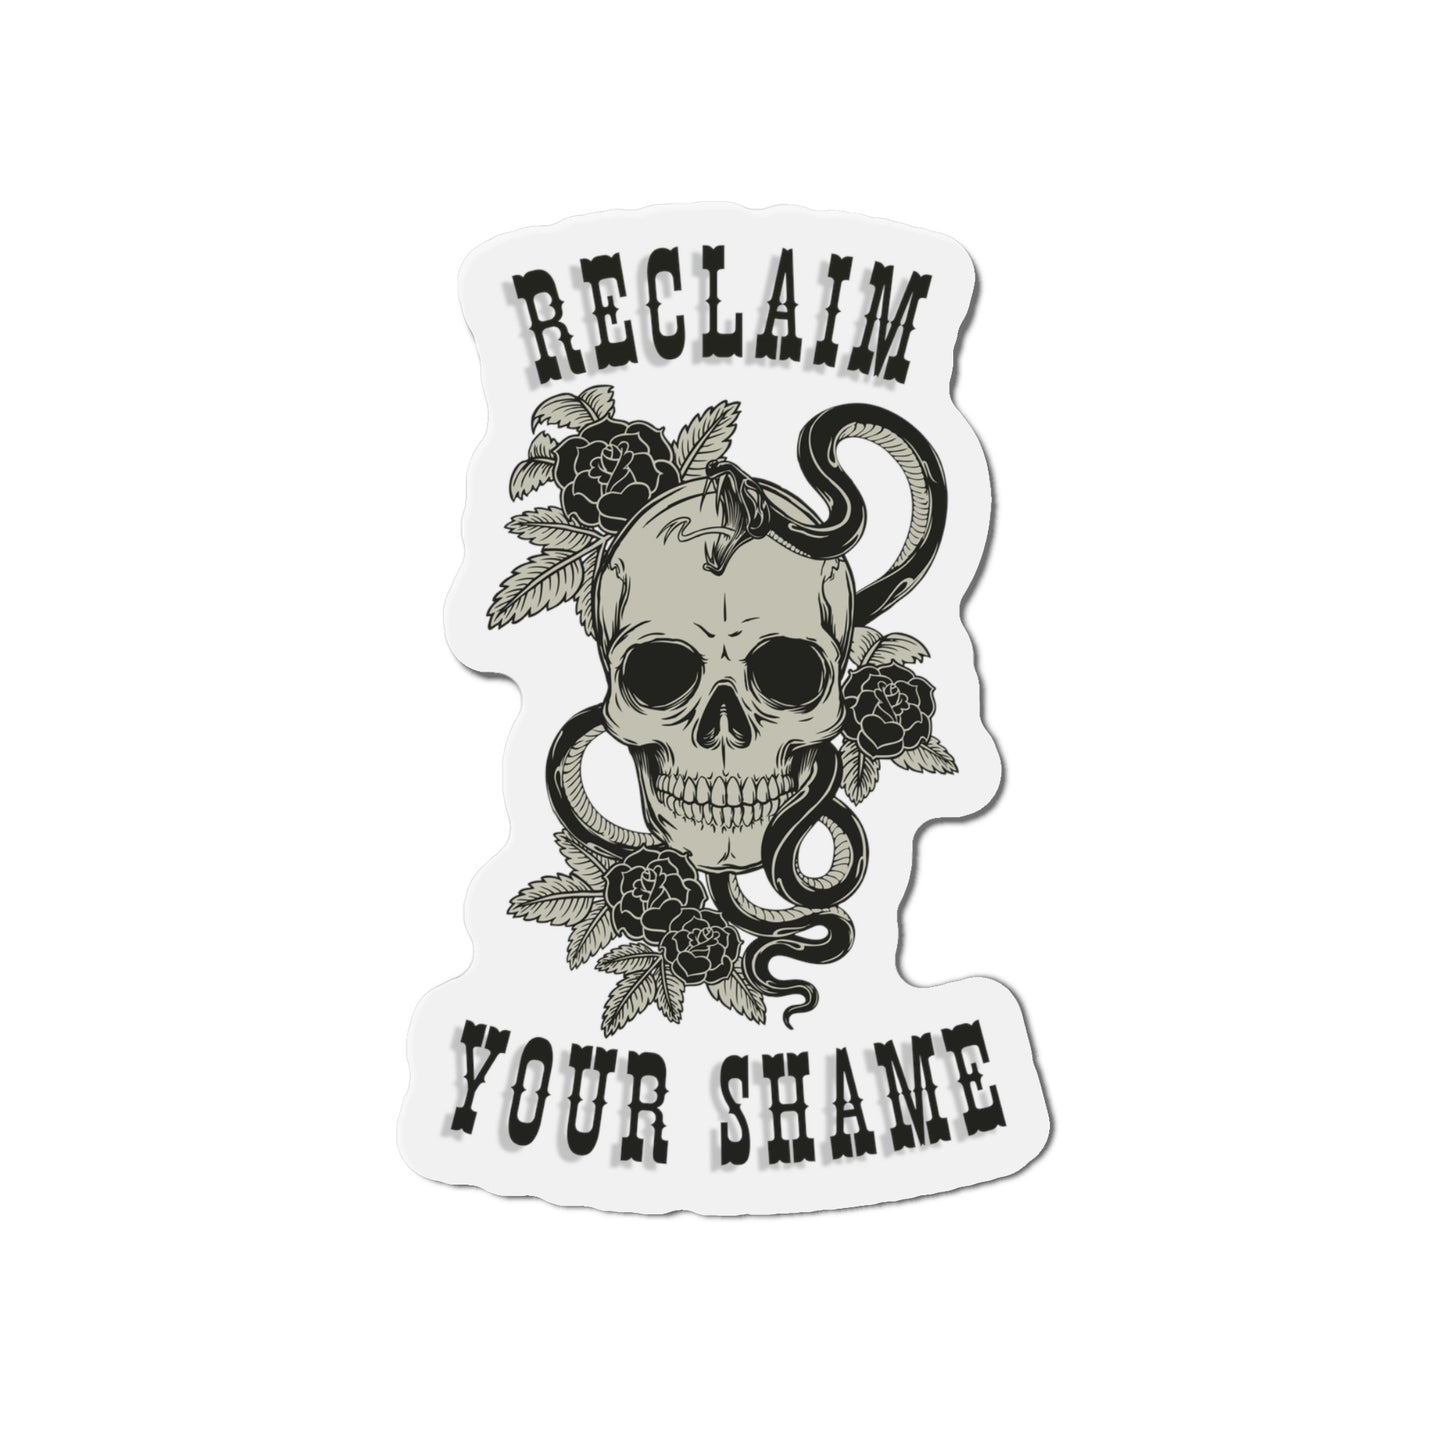 Reclaim Your Shame [Gauthism Line] Die-Cut Magnets